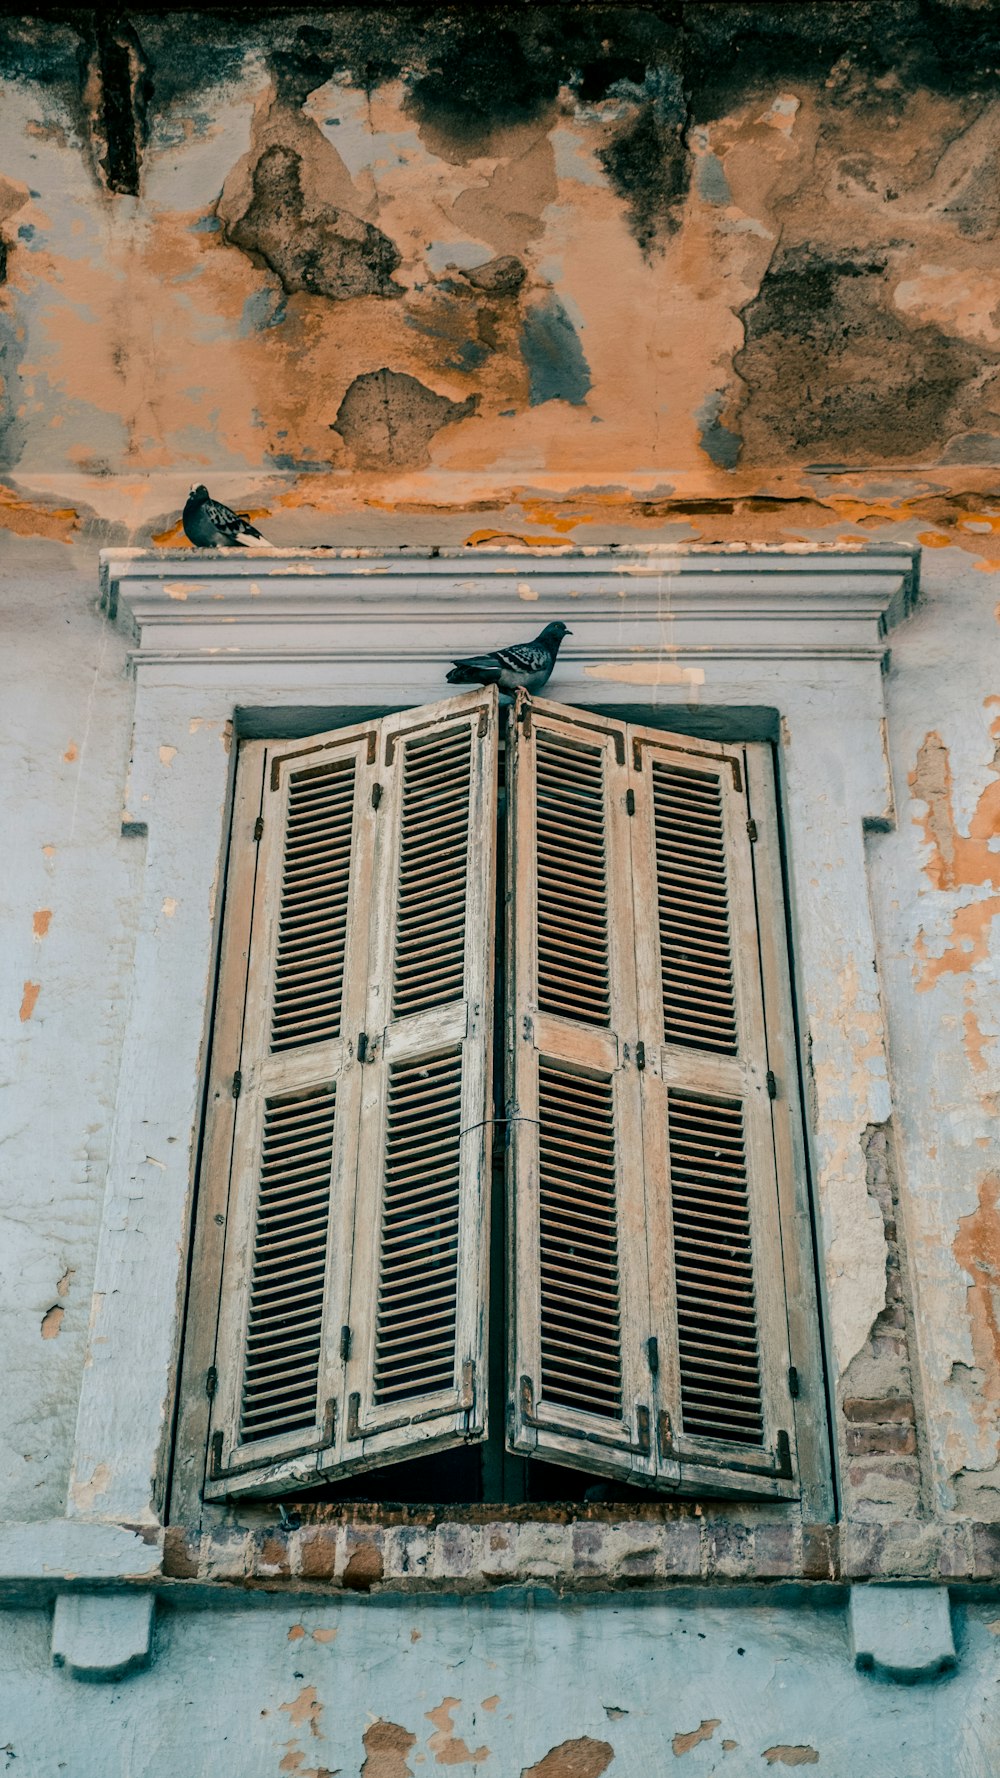 a bird is sitting on the window sill of an old building